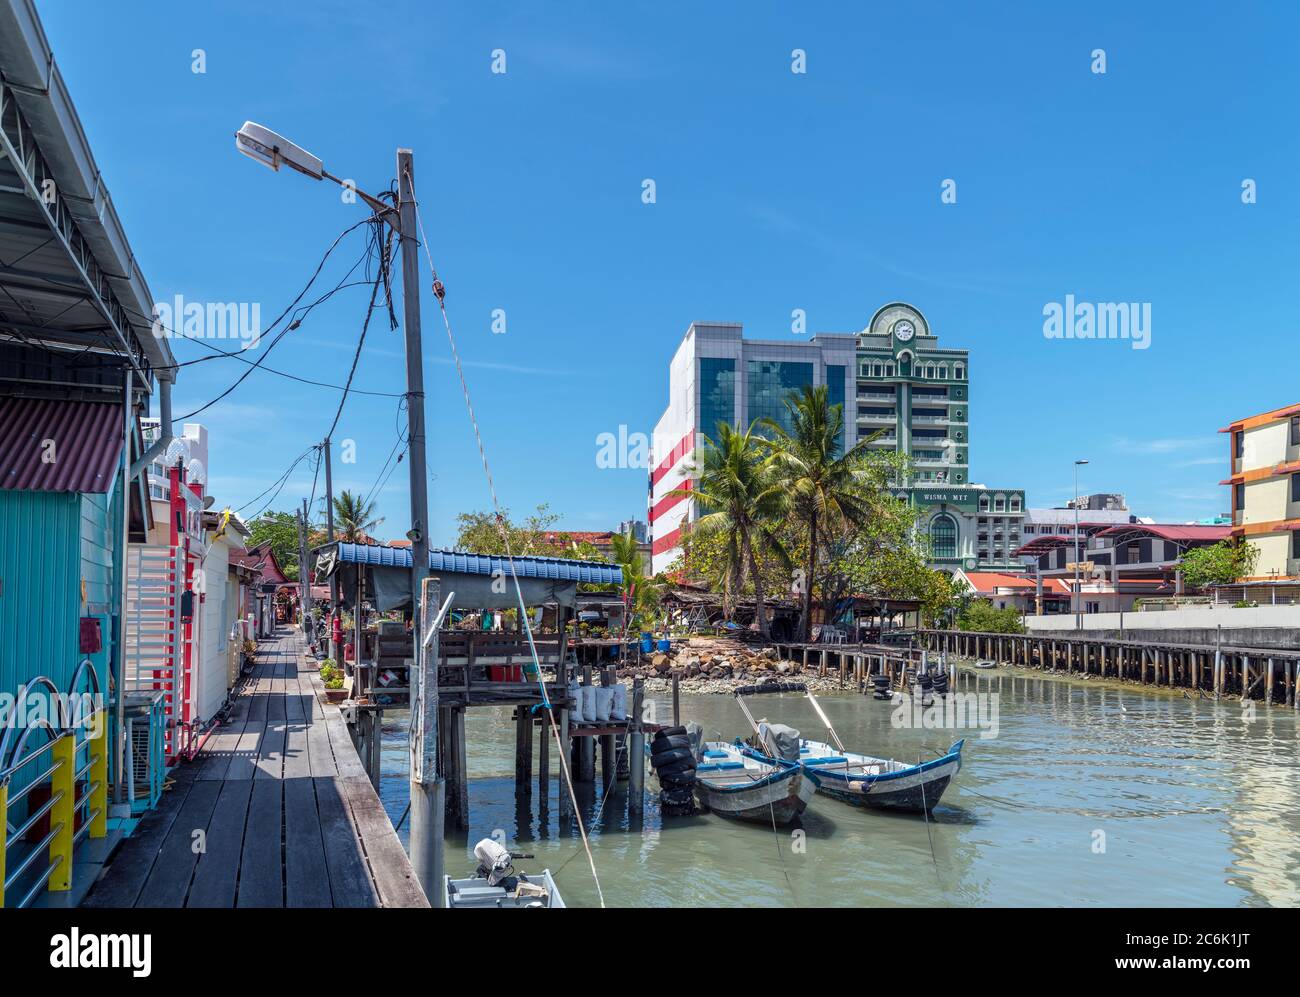 Jetties cinese del clan, Weld Quay, George Town, Penang, Malesia Foto Stock